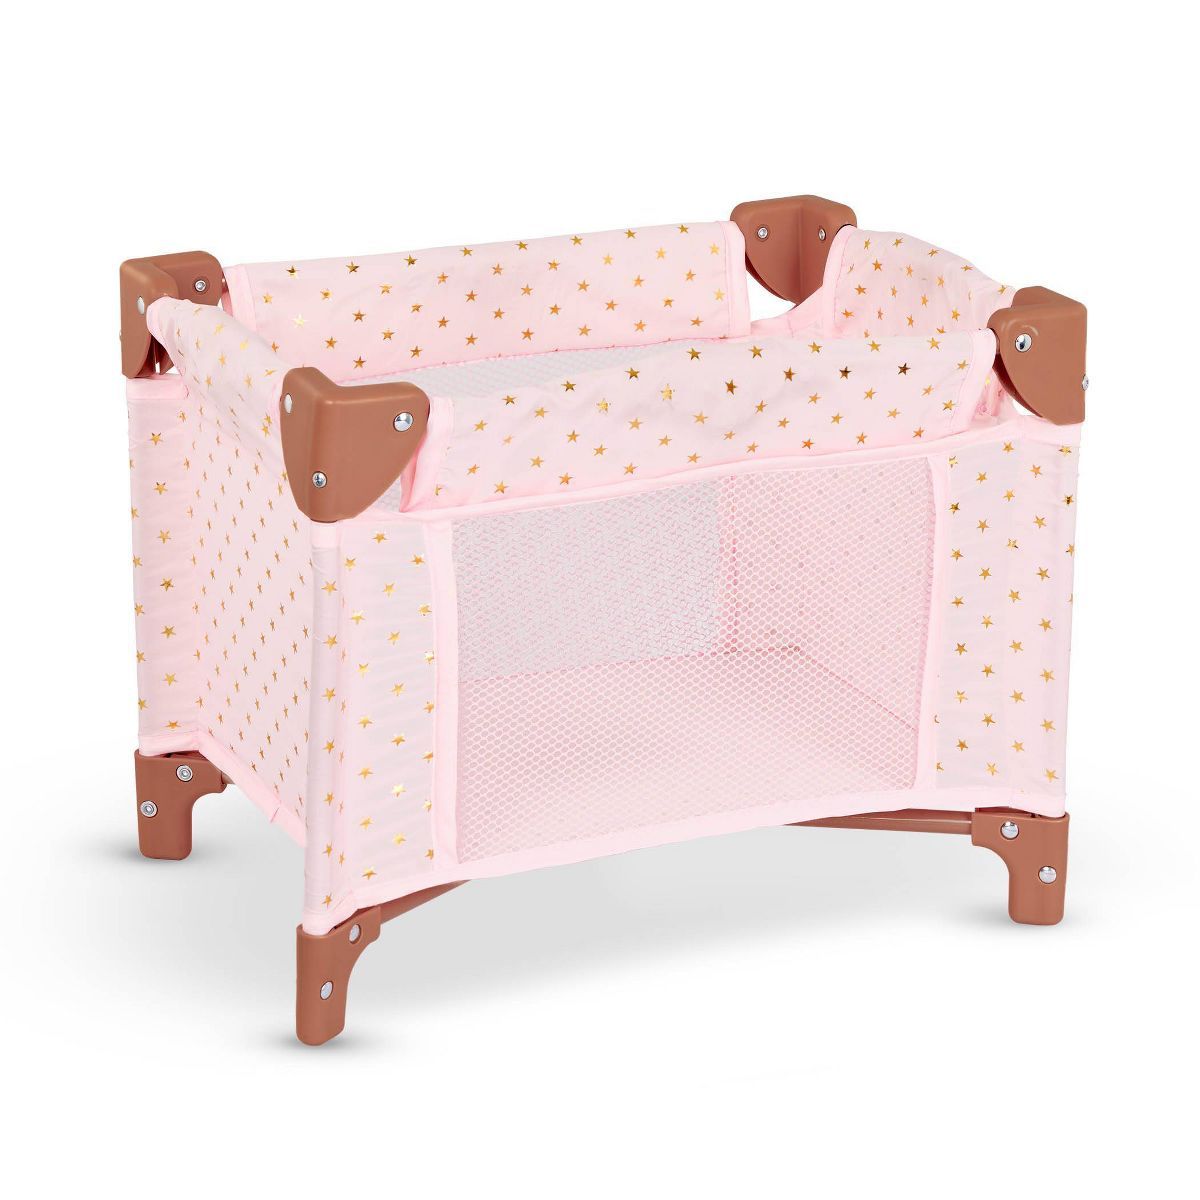 LullaBaby Doll Playpen Pink Foldable Accessory - Gold Star Print | Target